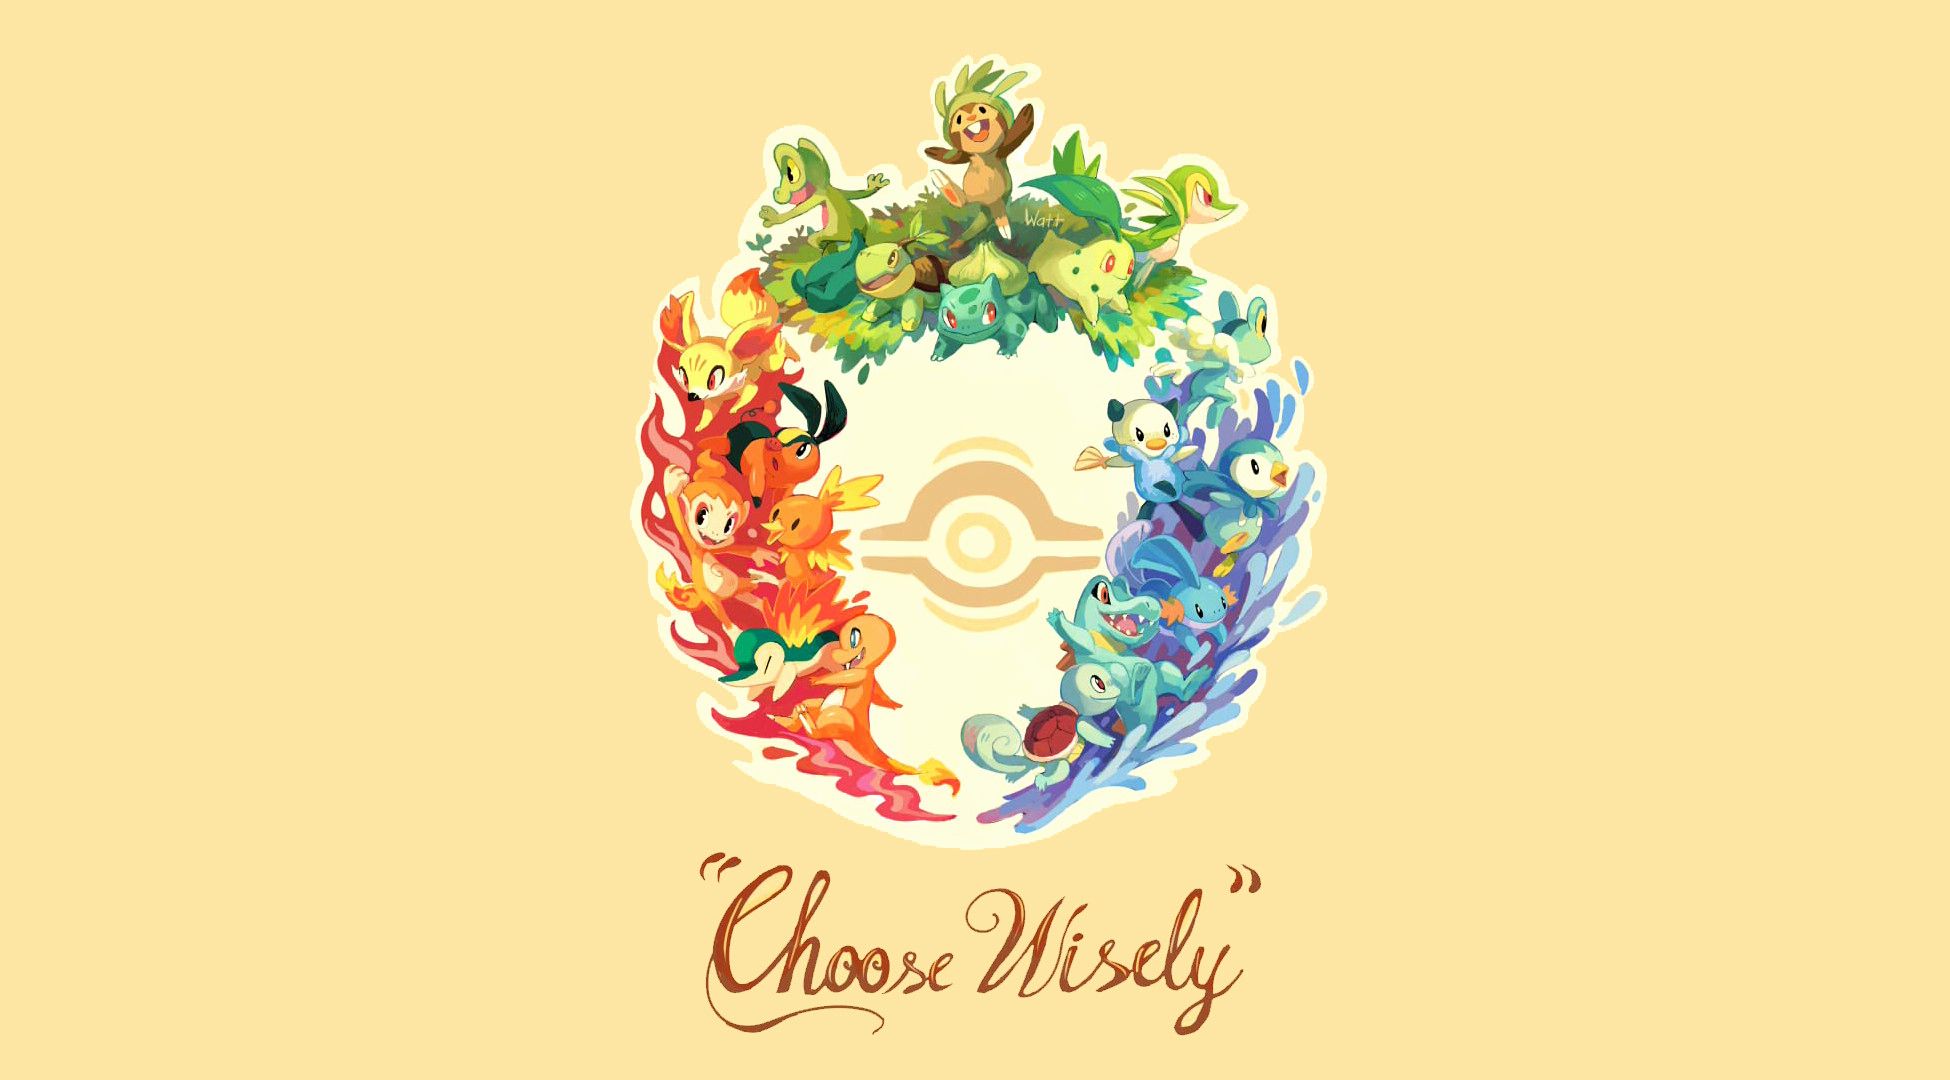 Pokemon Iphone Wallpaper Awesome Iphone Pokemon Wallpaper - Pokémon Go Teams Memes - HD Wallpaper 